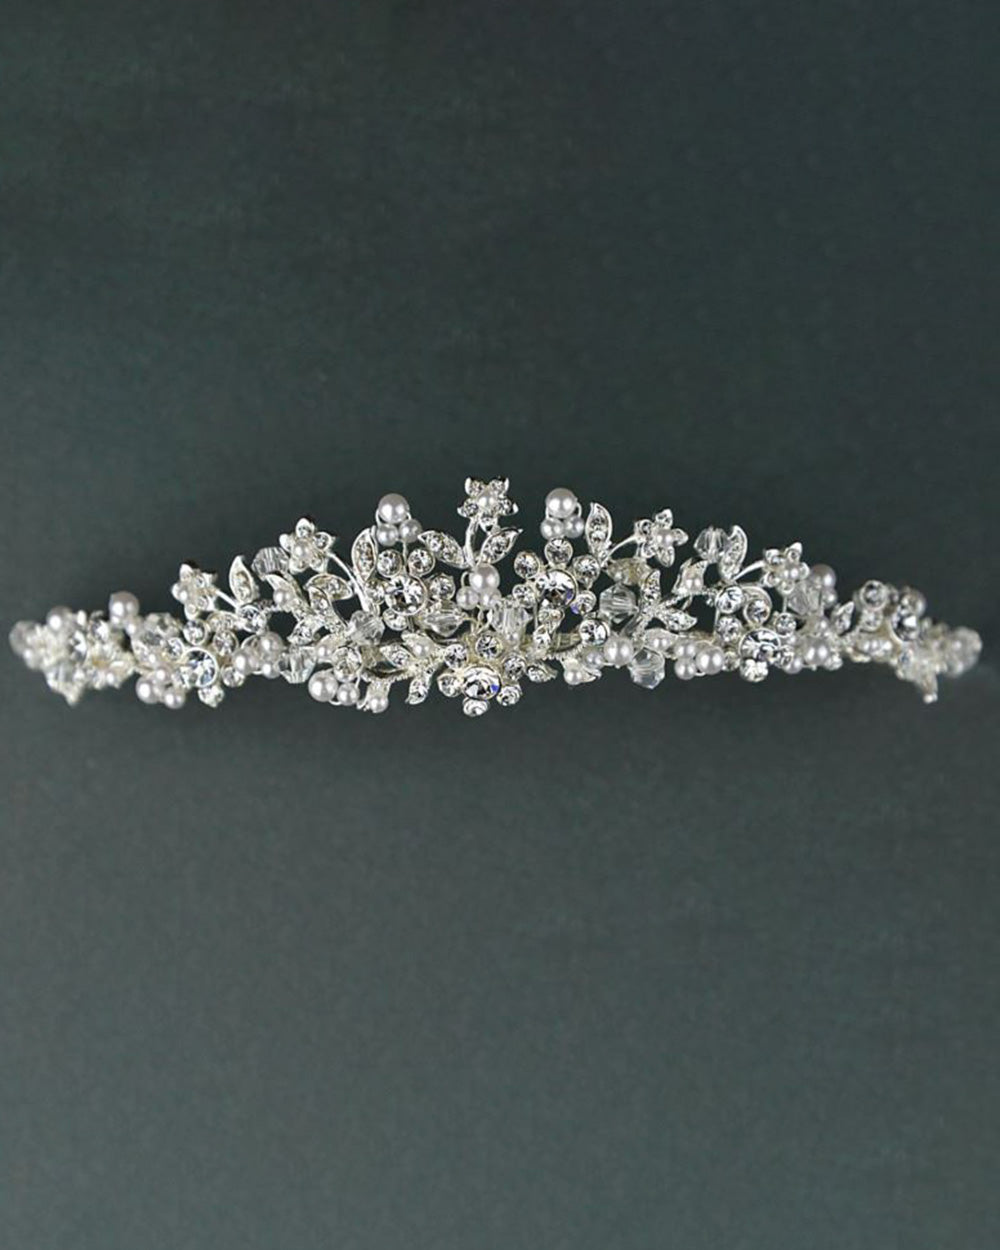 This diamante wedding tiara oozes sophistication and effortless style. Highly detailed with crystals and diamantes to create floral and leaf shapes. Decorated with stunning pearl beads for a classy and timeless design.  Why not take advantage of any and all chances to wear a tiara. If you can't wear one on your wedding day, when can you? Every bride deserves to feel like a true princess on their big day. So, complete your bridal look with one of our beautiful wedding tiaras.